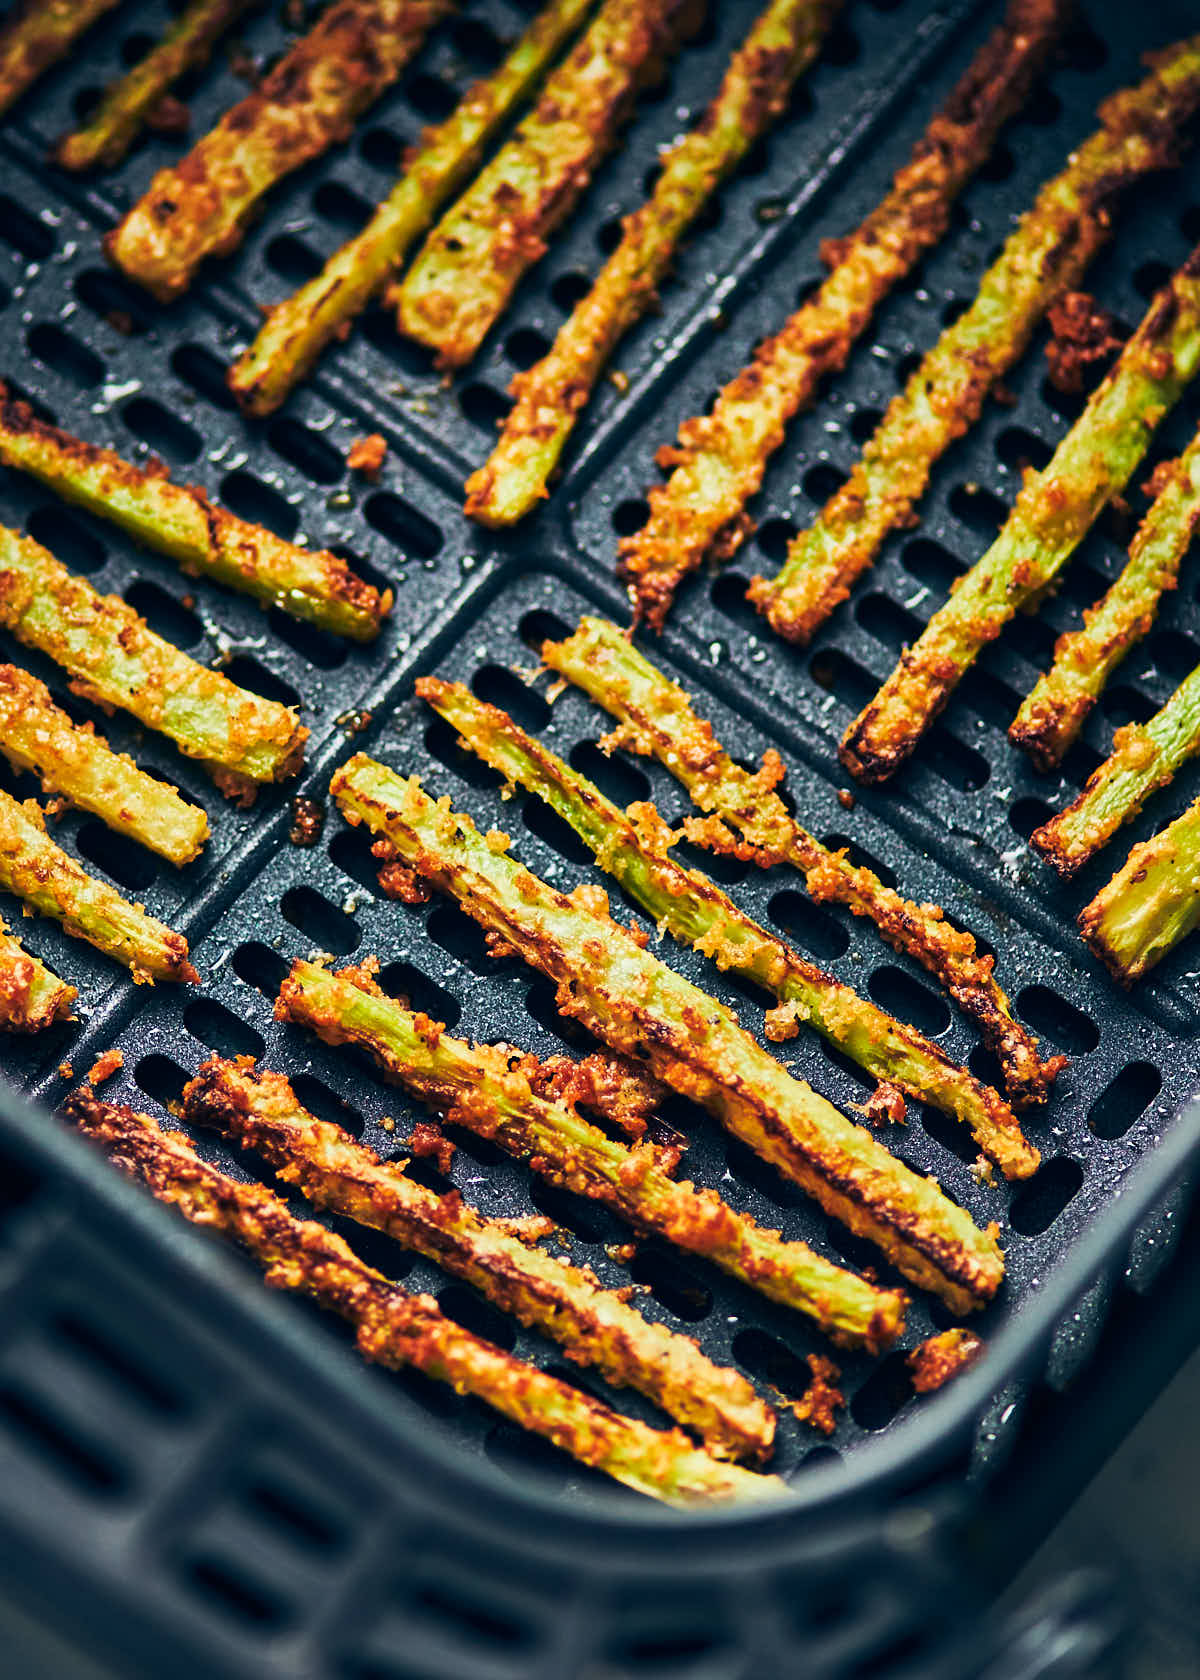 Rows of broccoli fries in air fryer directly after cooking